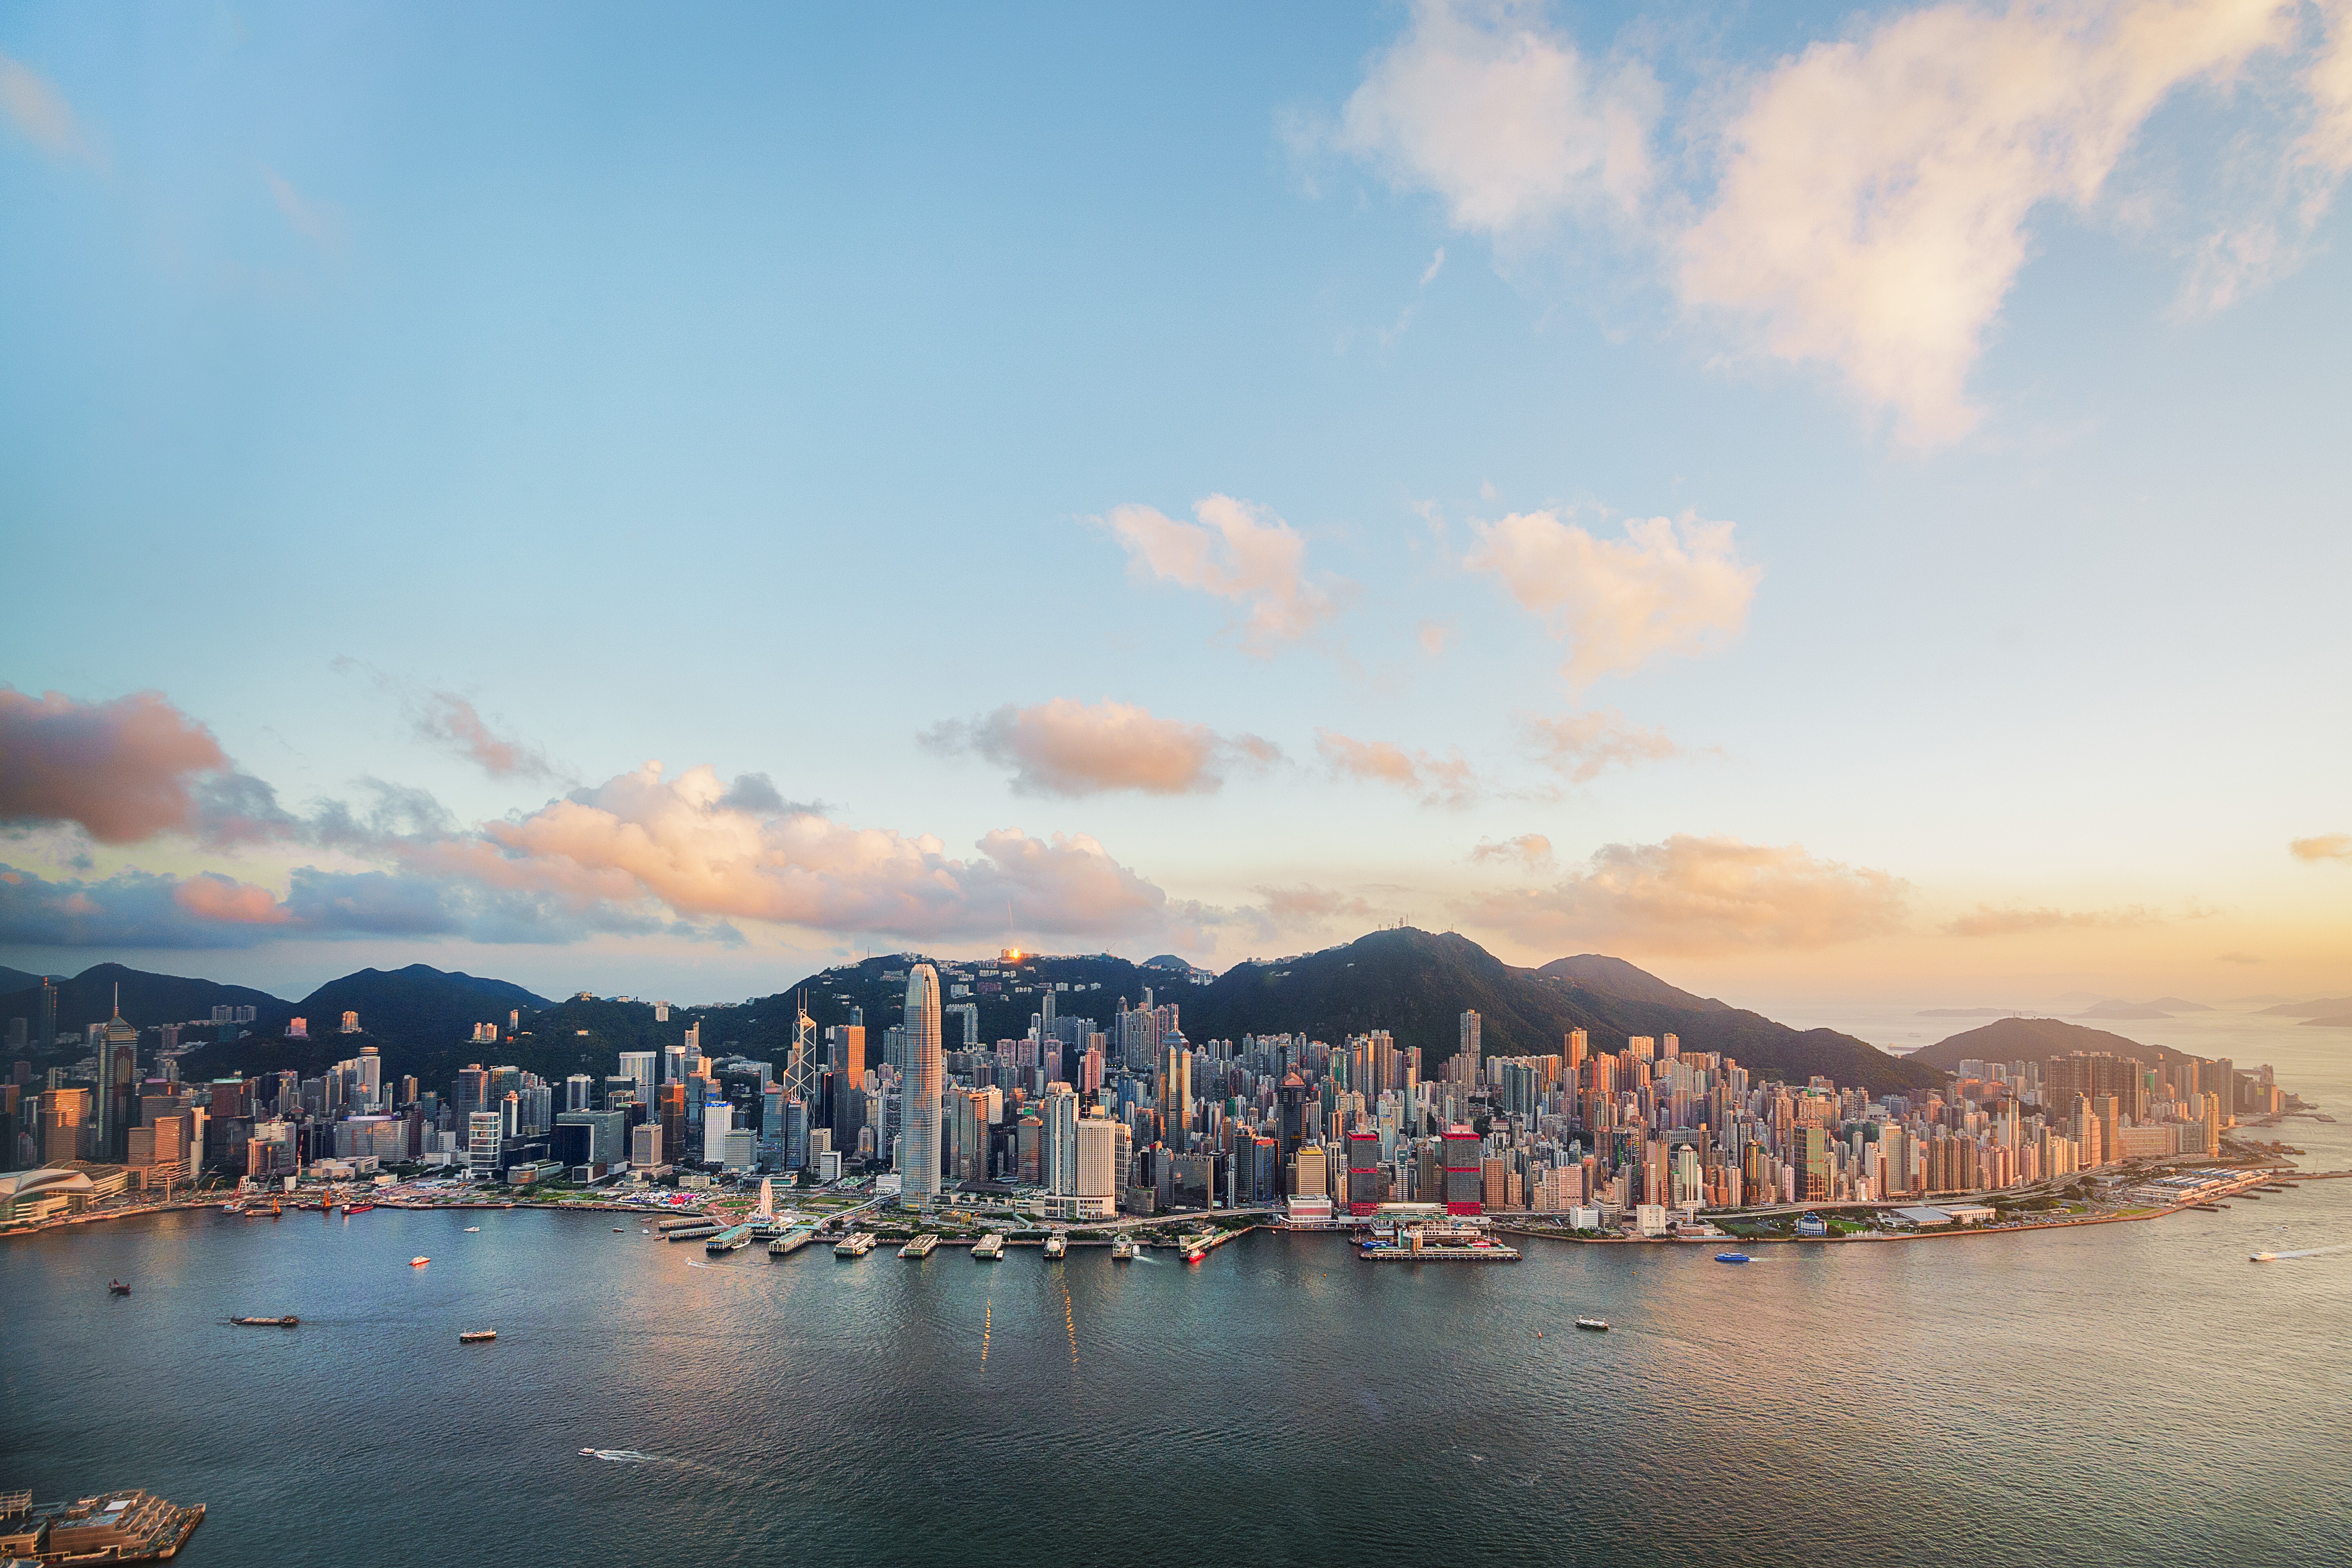 Hong Kong Island and Victoria Harbour from the air. Photo: Getty Images/iStockphoto